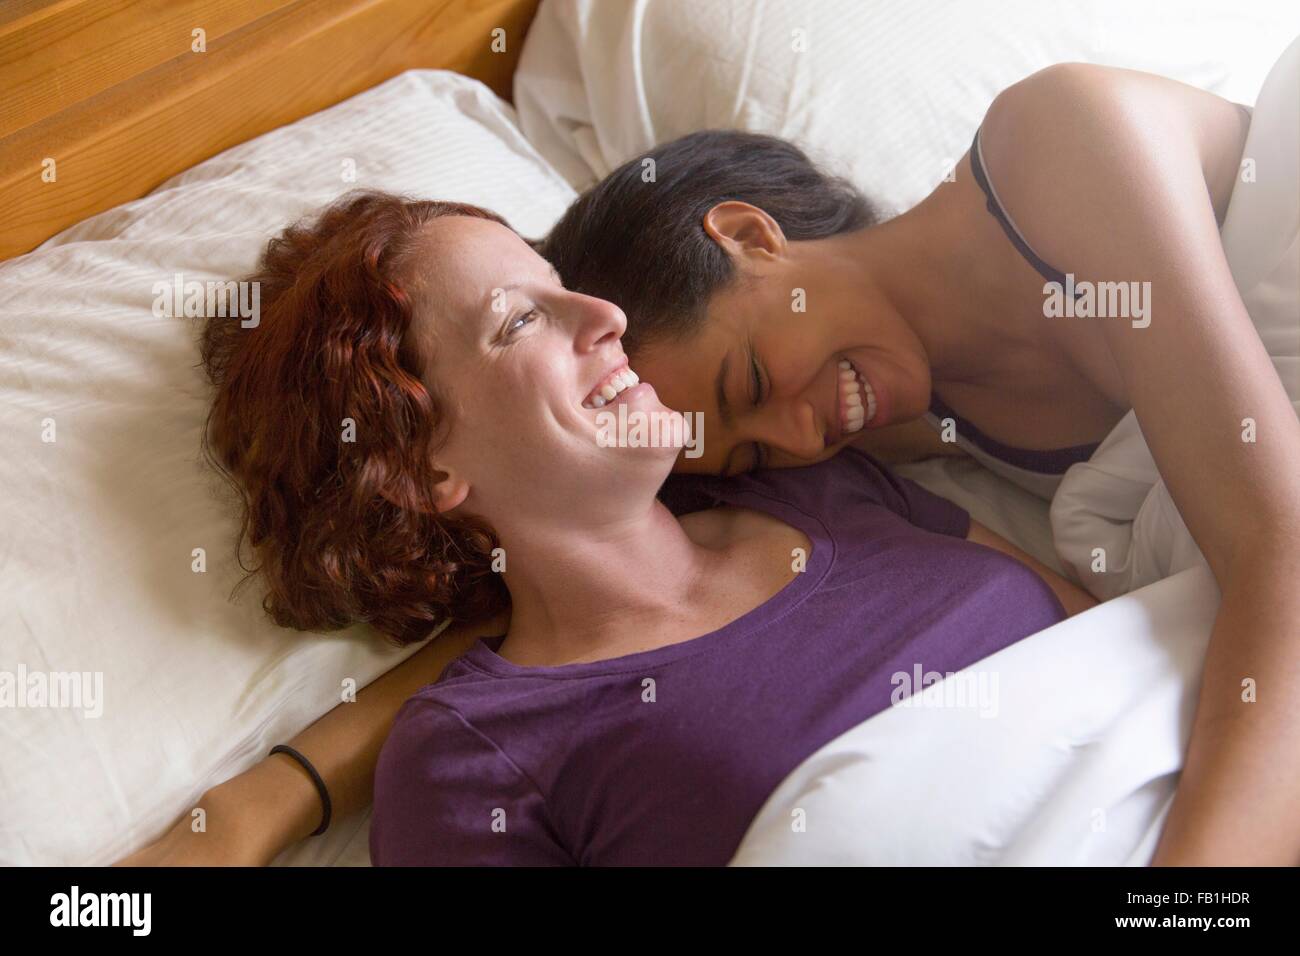 High angle view of lesbian couple lying in bed hugging, smiling Stock Photo